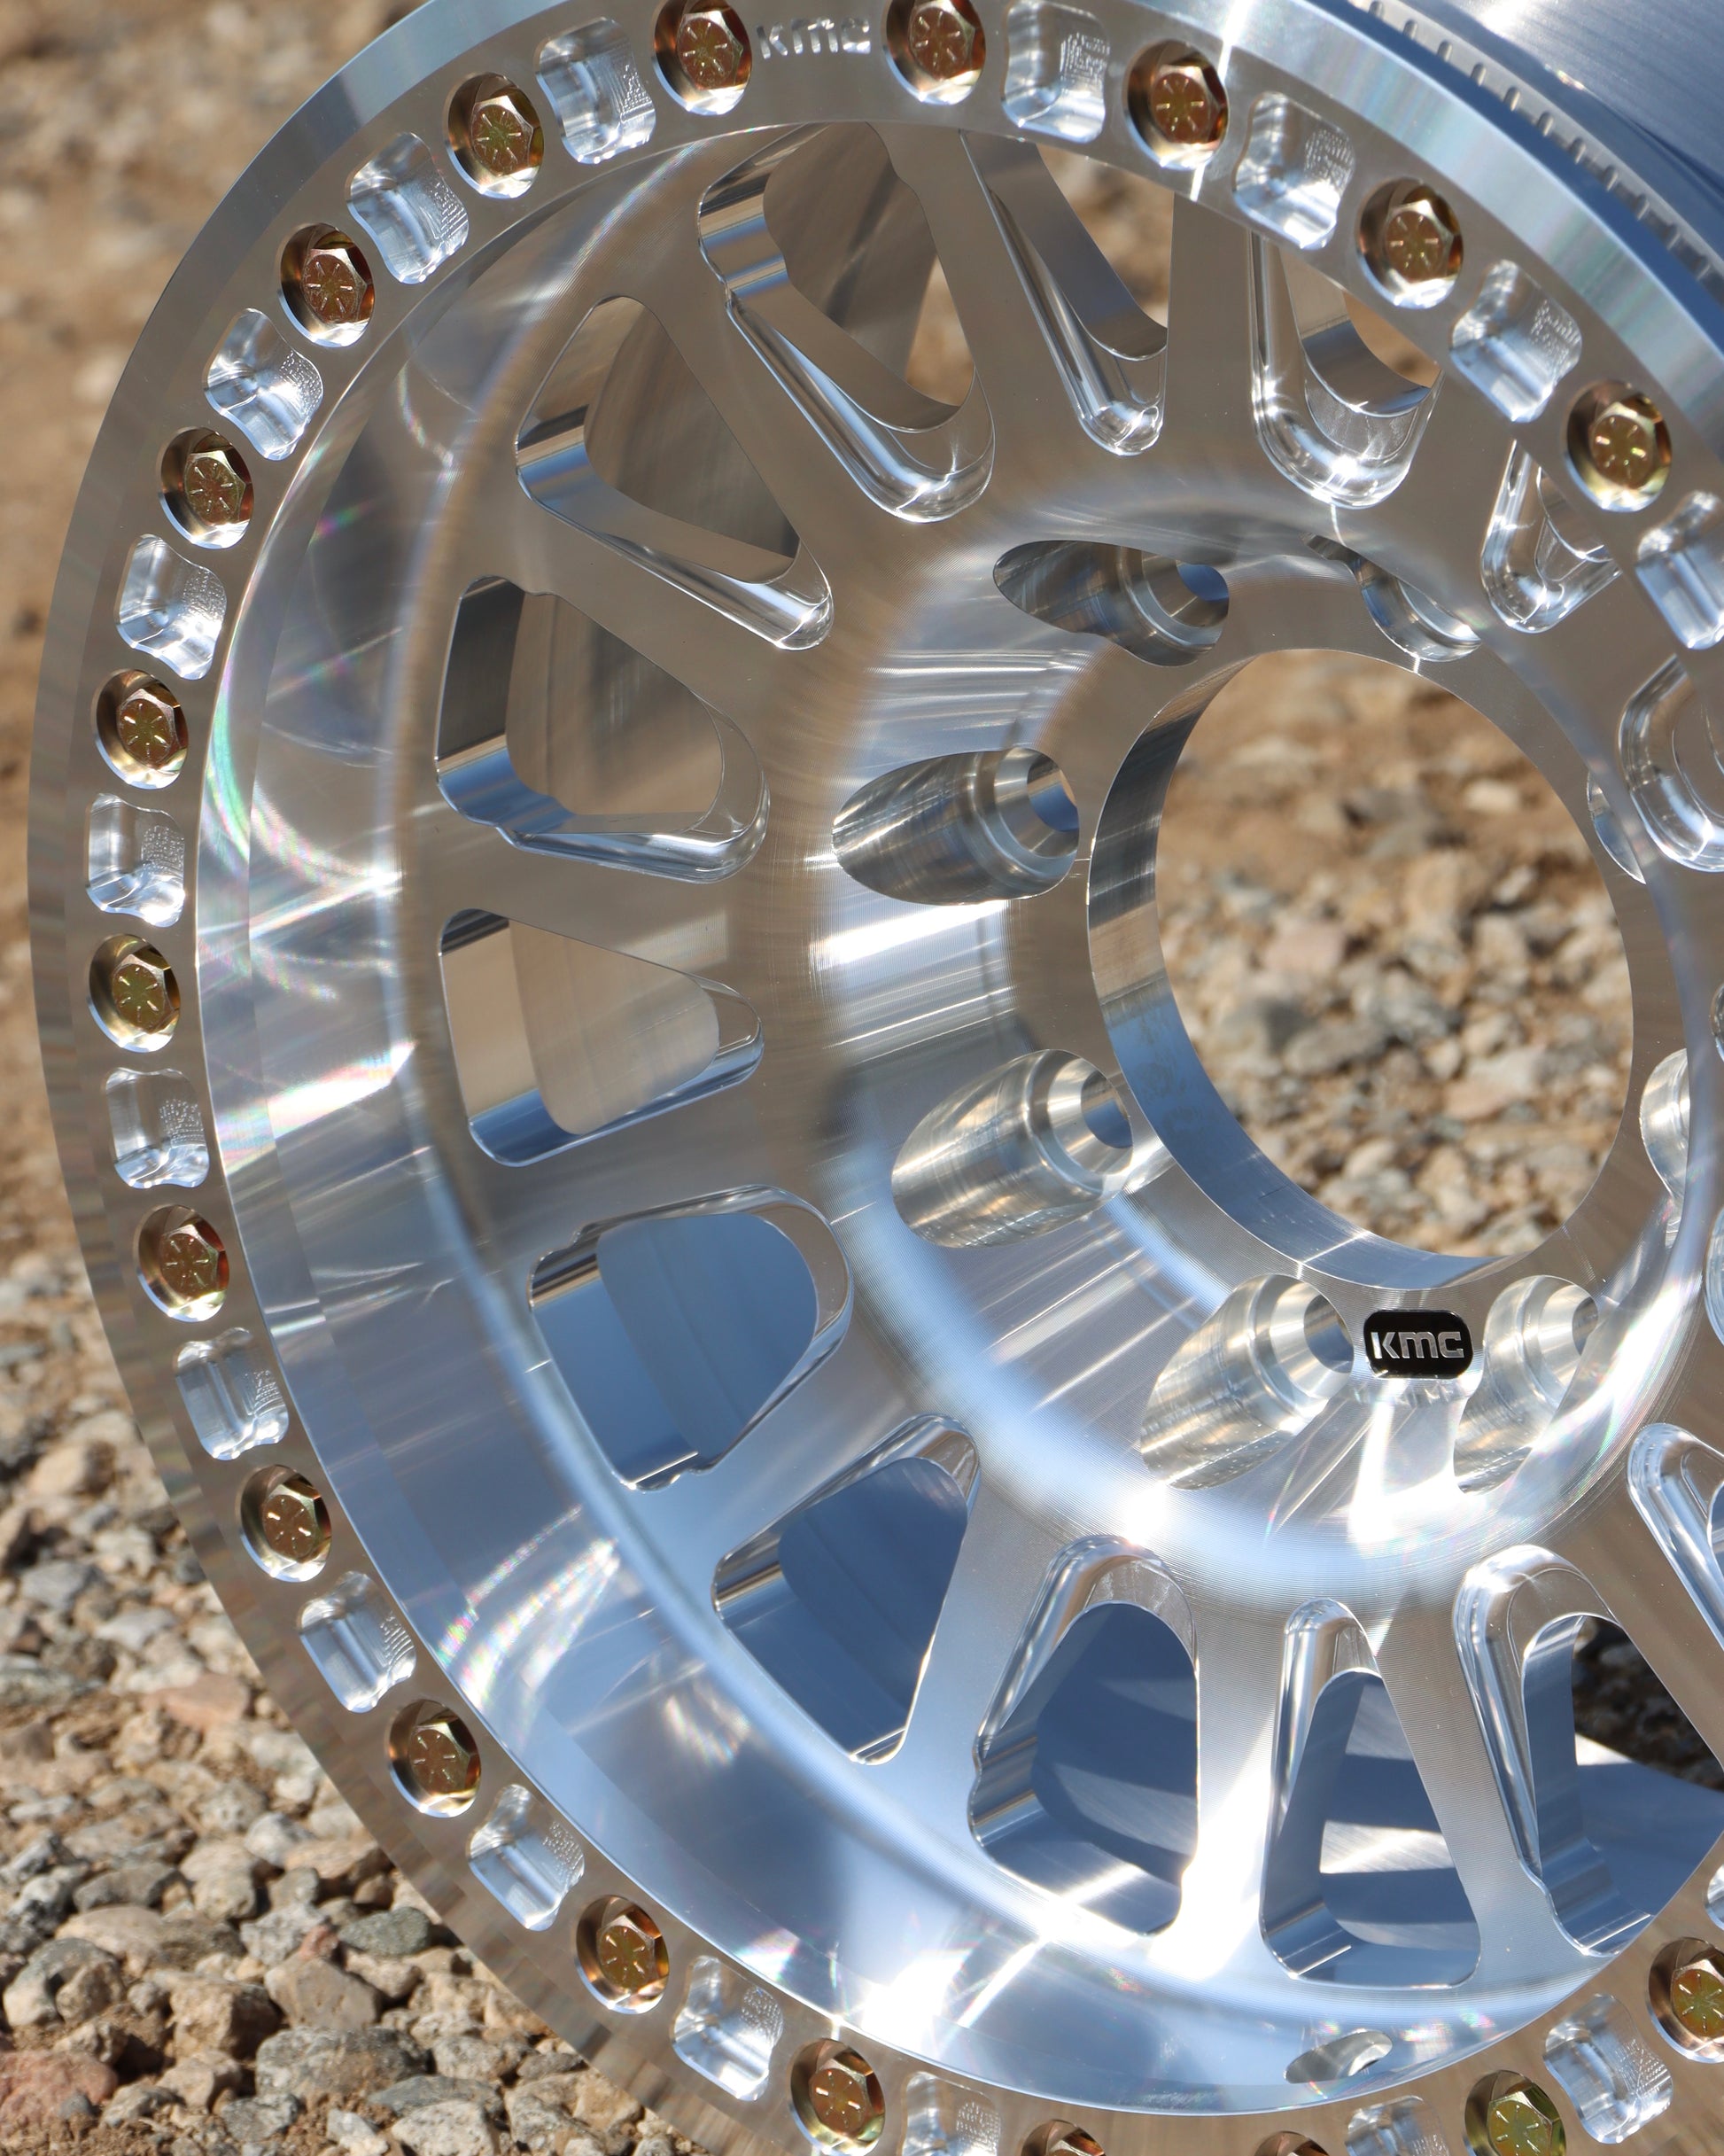 Close-up of the kmc impact forged bead lock wheel on gravel.